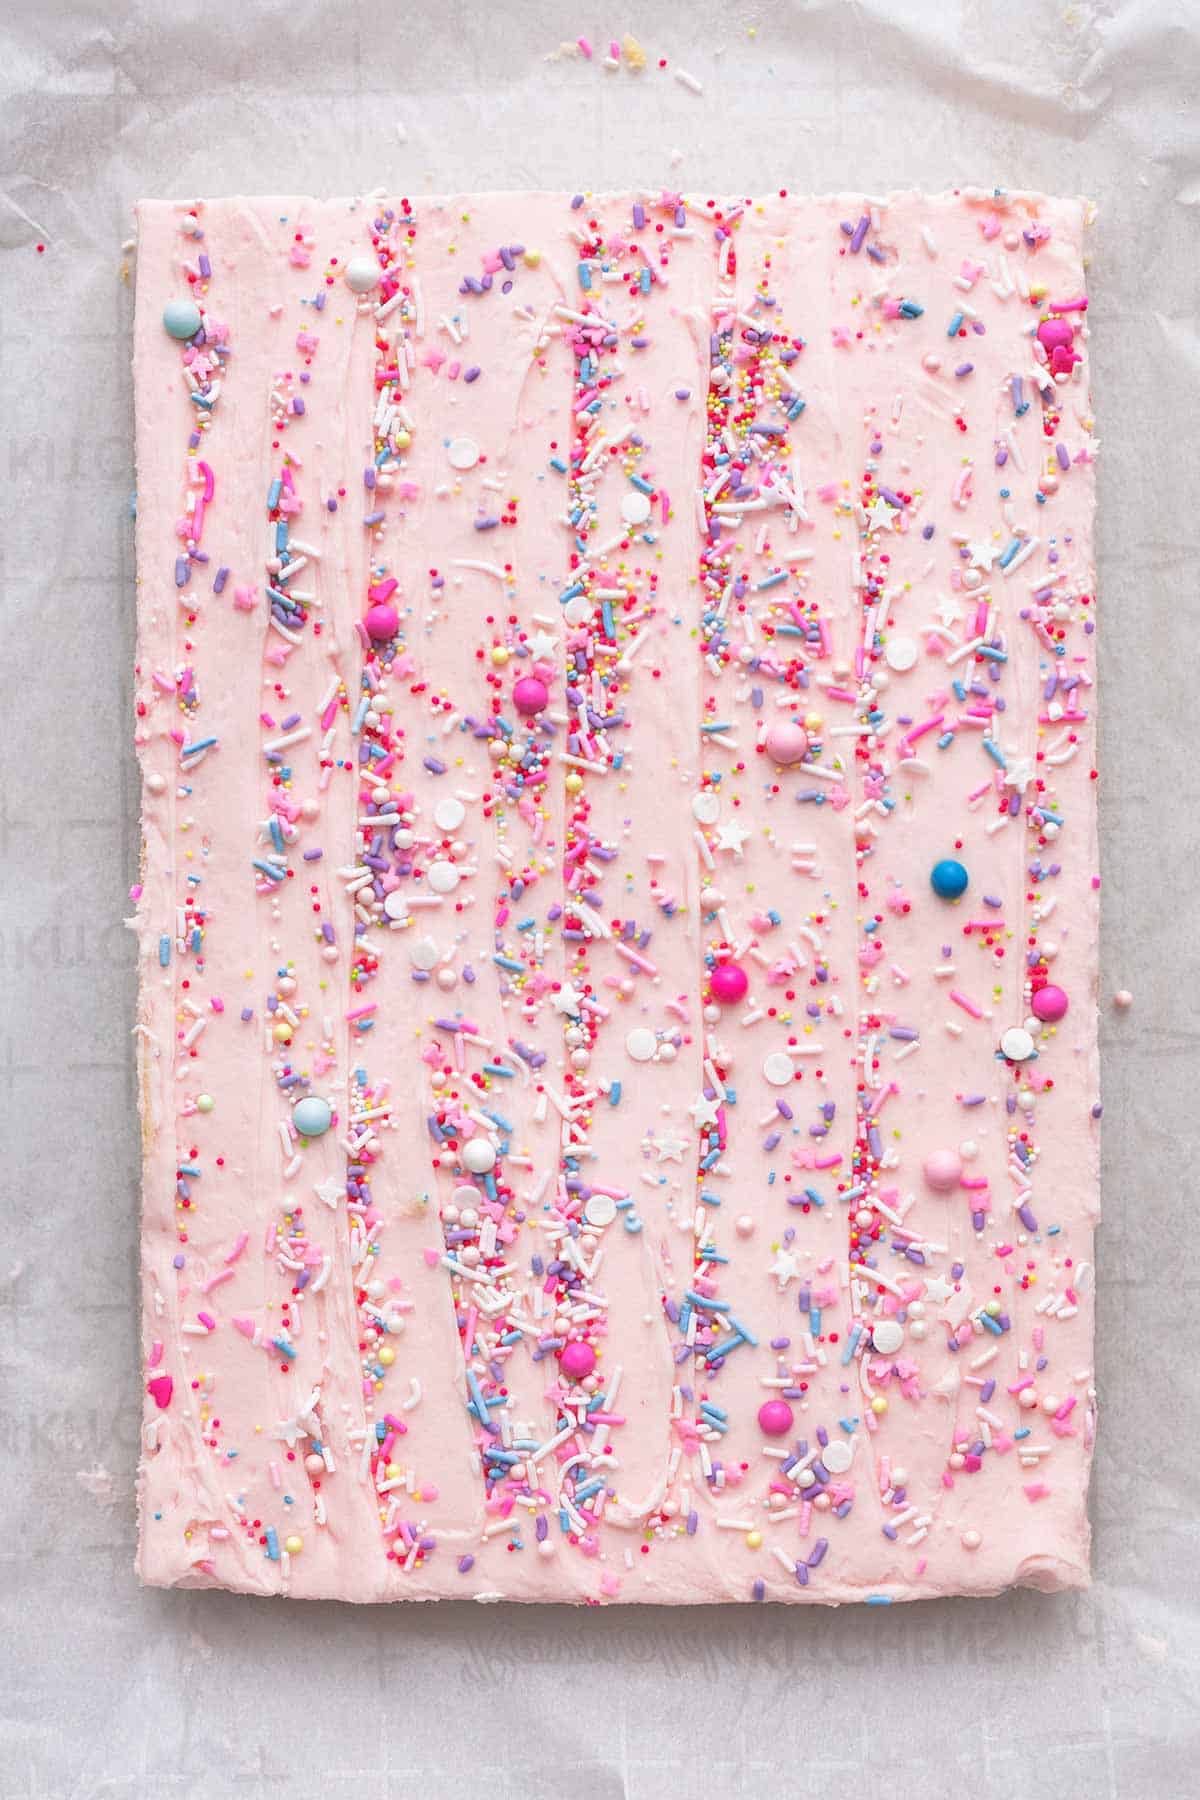 overhead view of frosted rectangle dessert with pink frosting and sprinkles